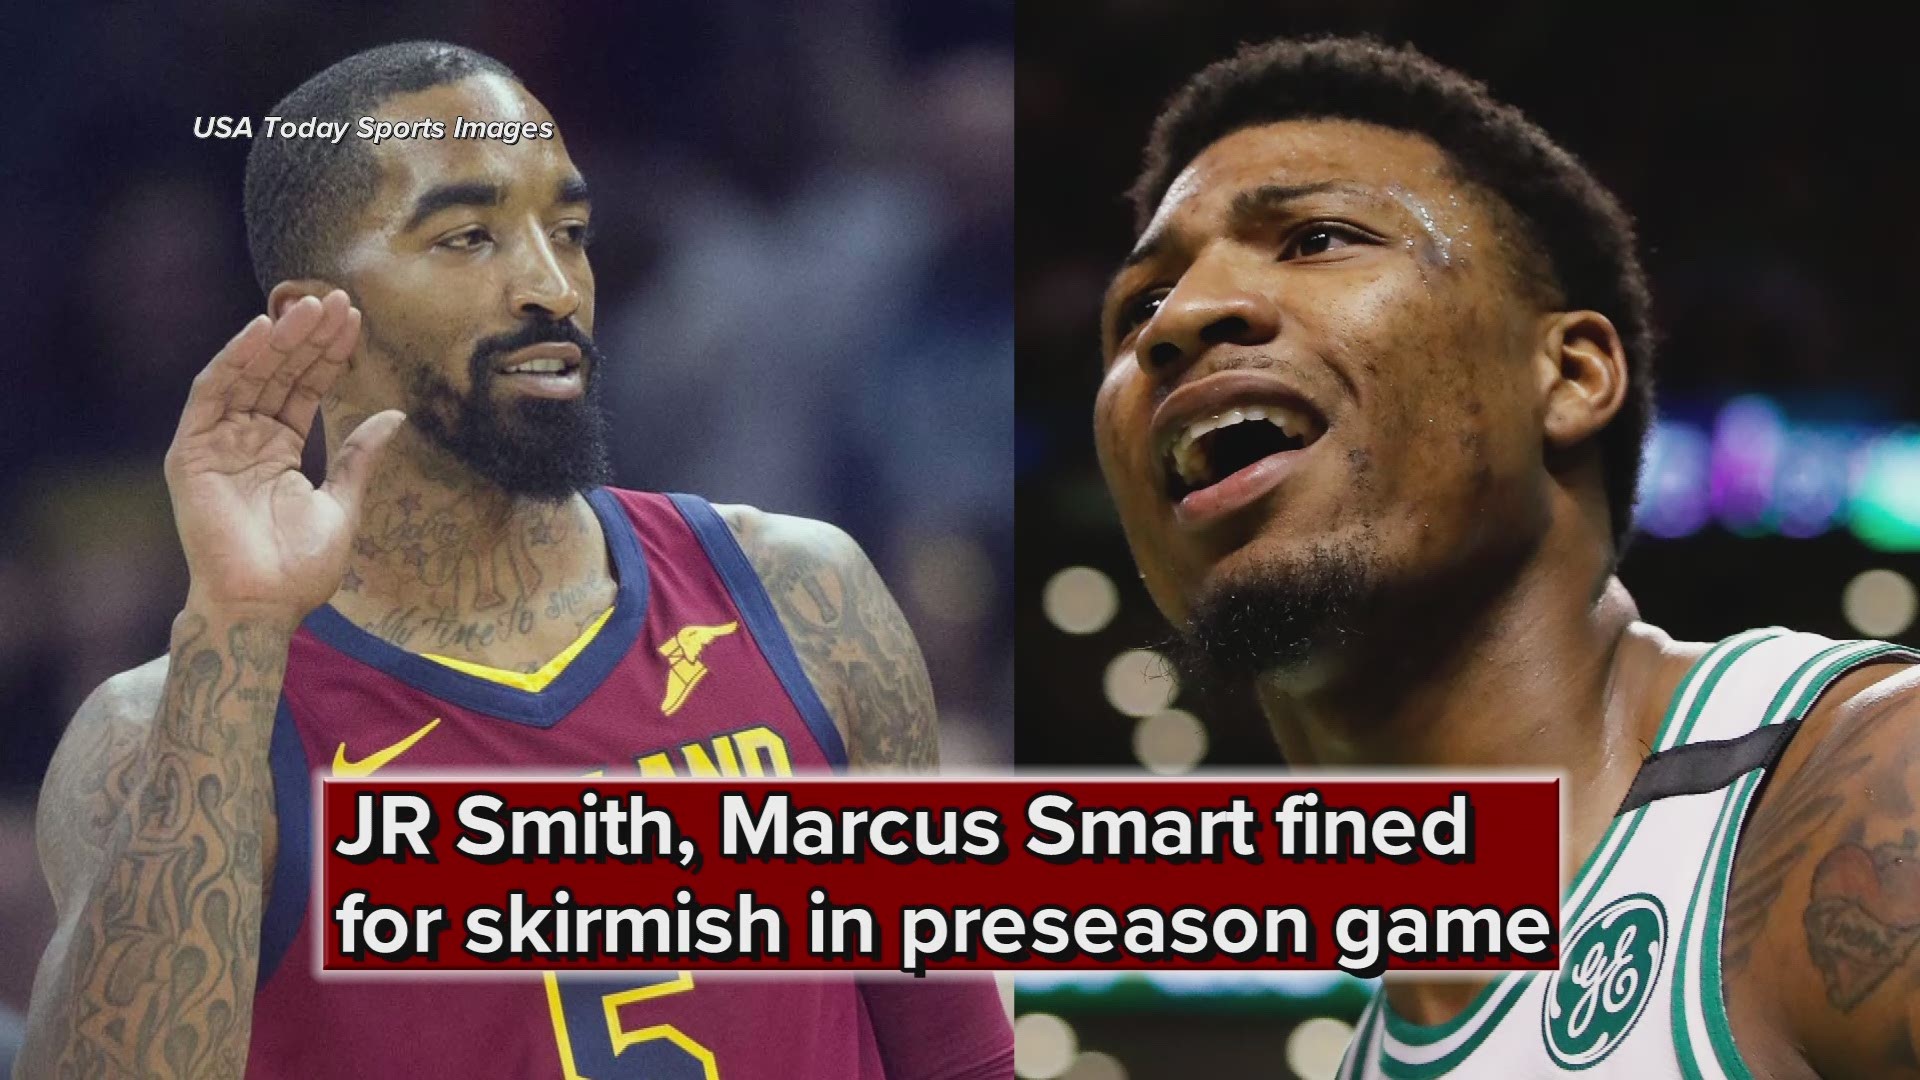 Cleveland Cavaliers' JR Smith, Boston Celtics' Marcus Smart fined for skirmish in preseason game